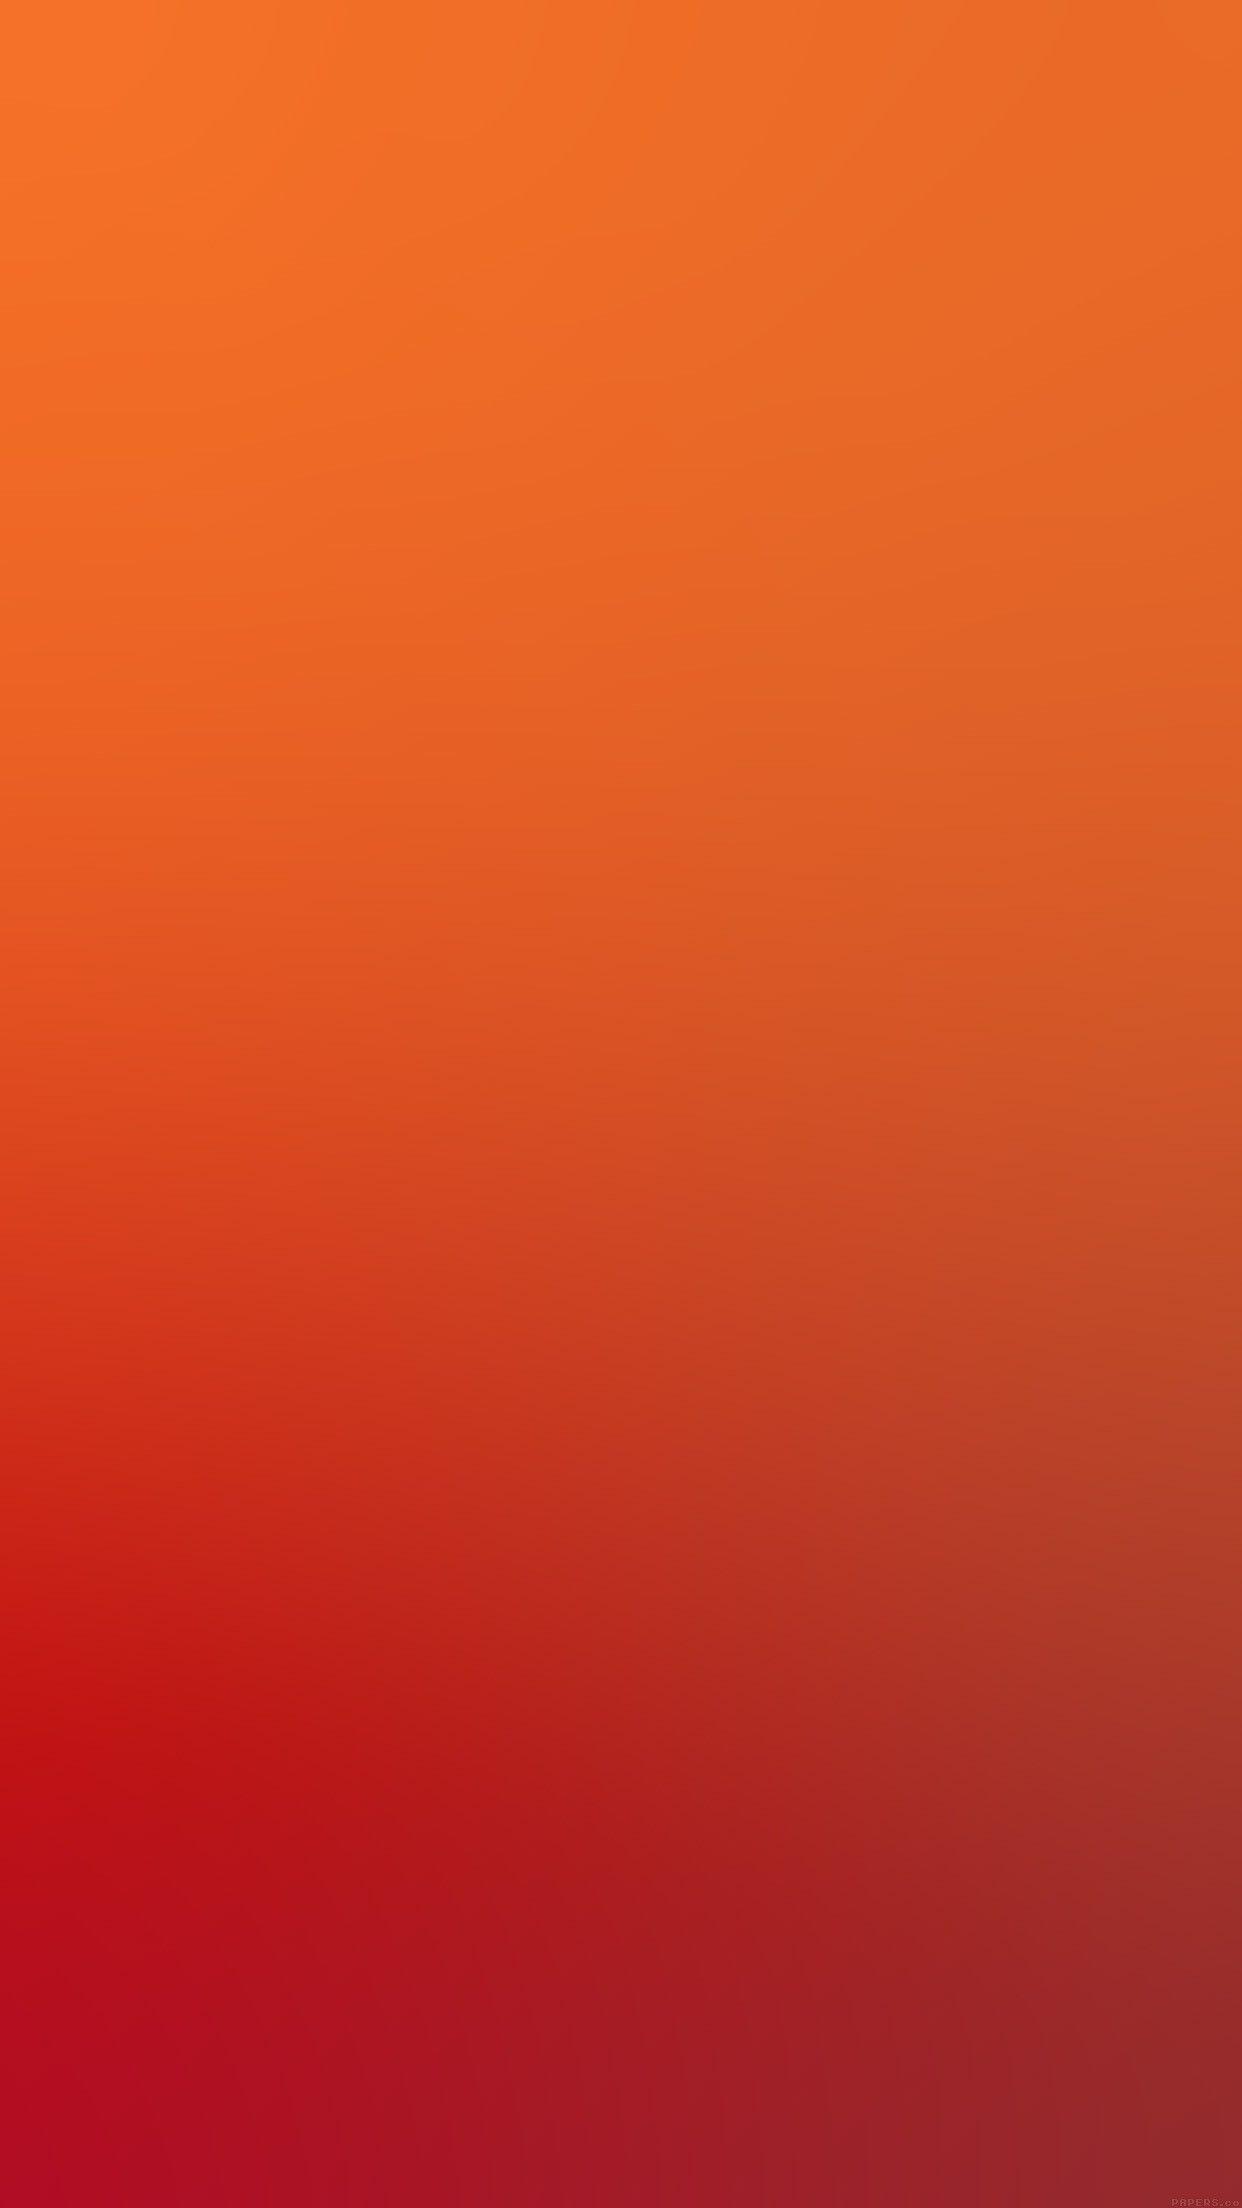 A collection of vibrant orange wallpapers for iPhone